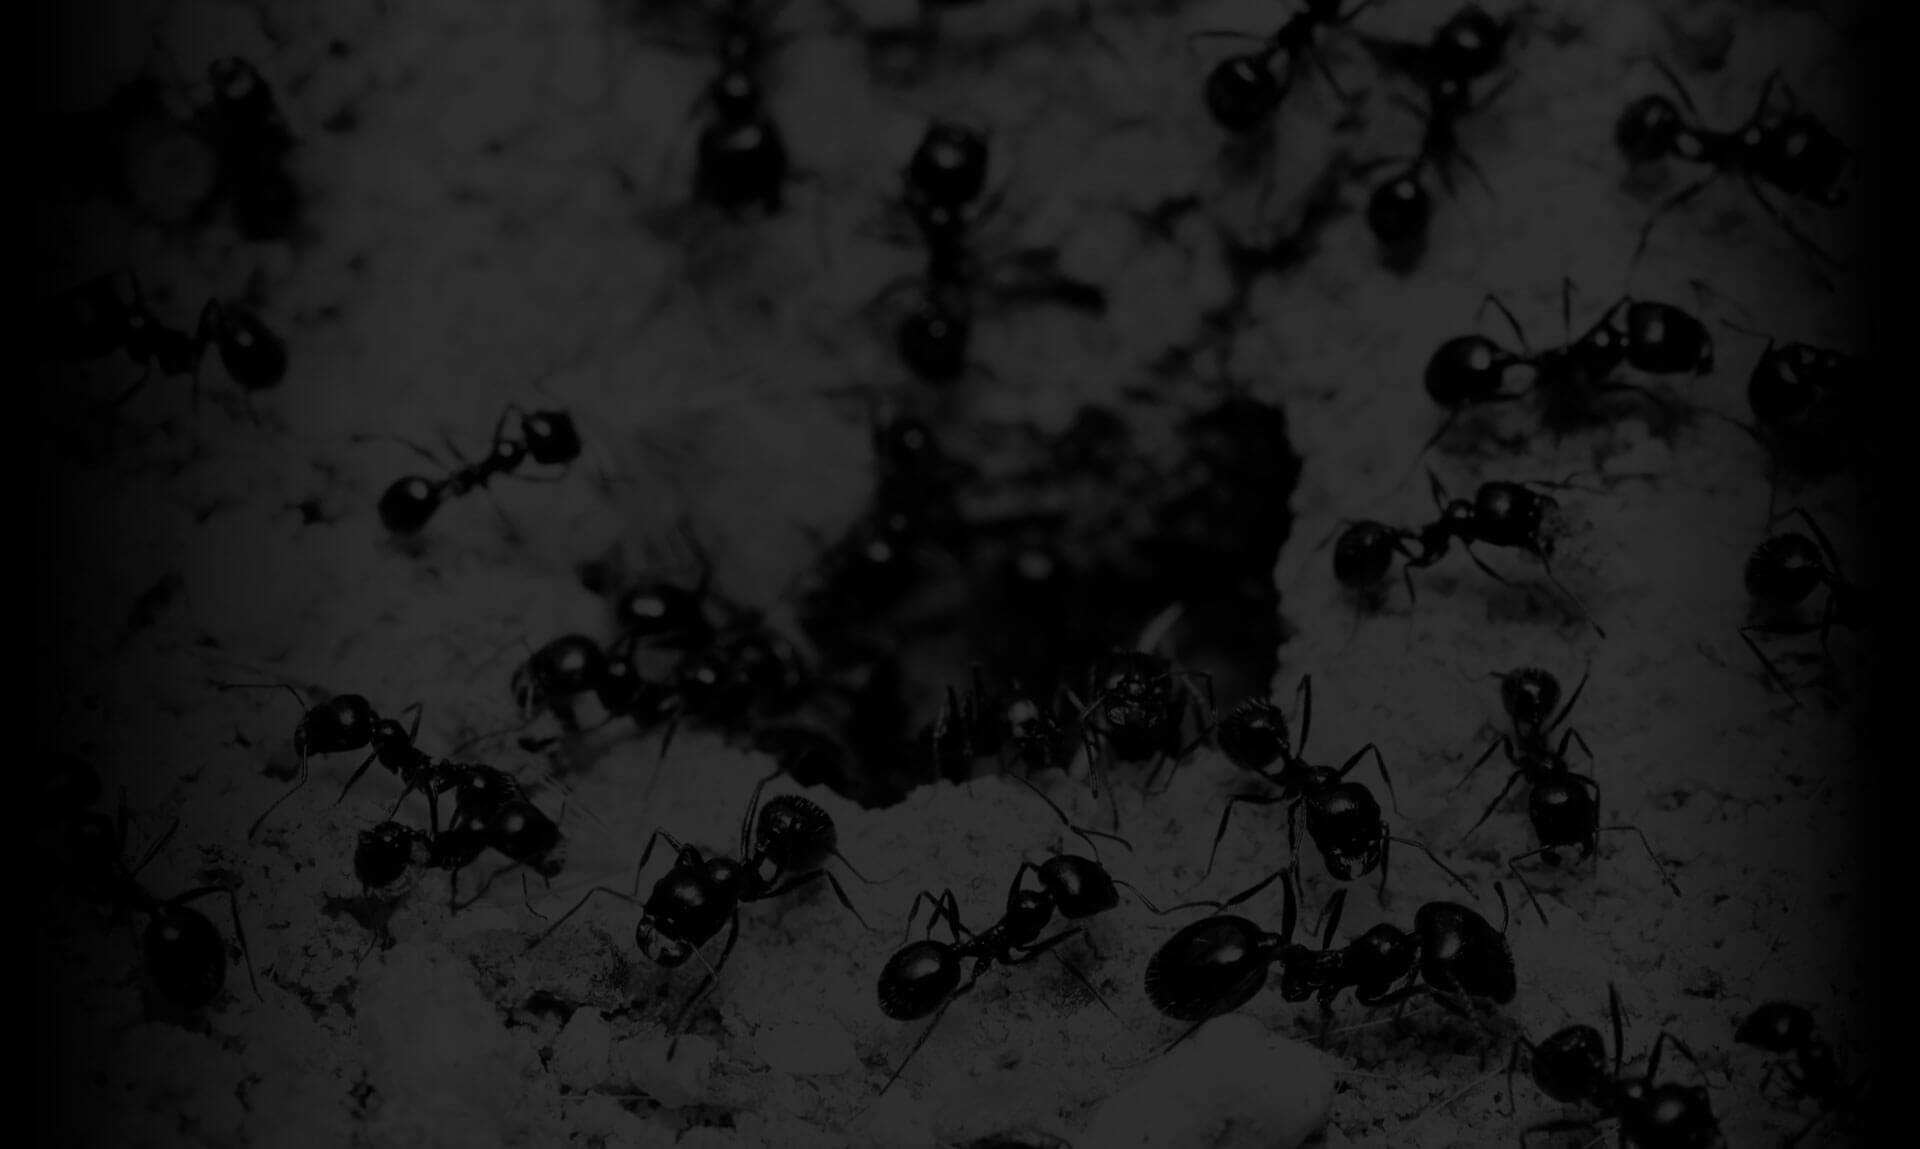 What is a group of ants called?